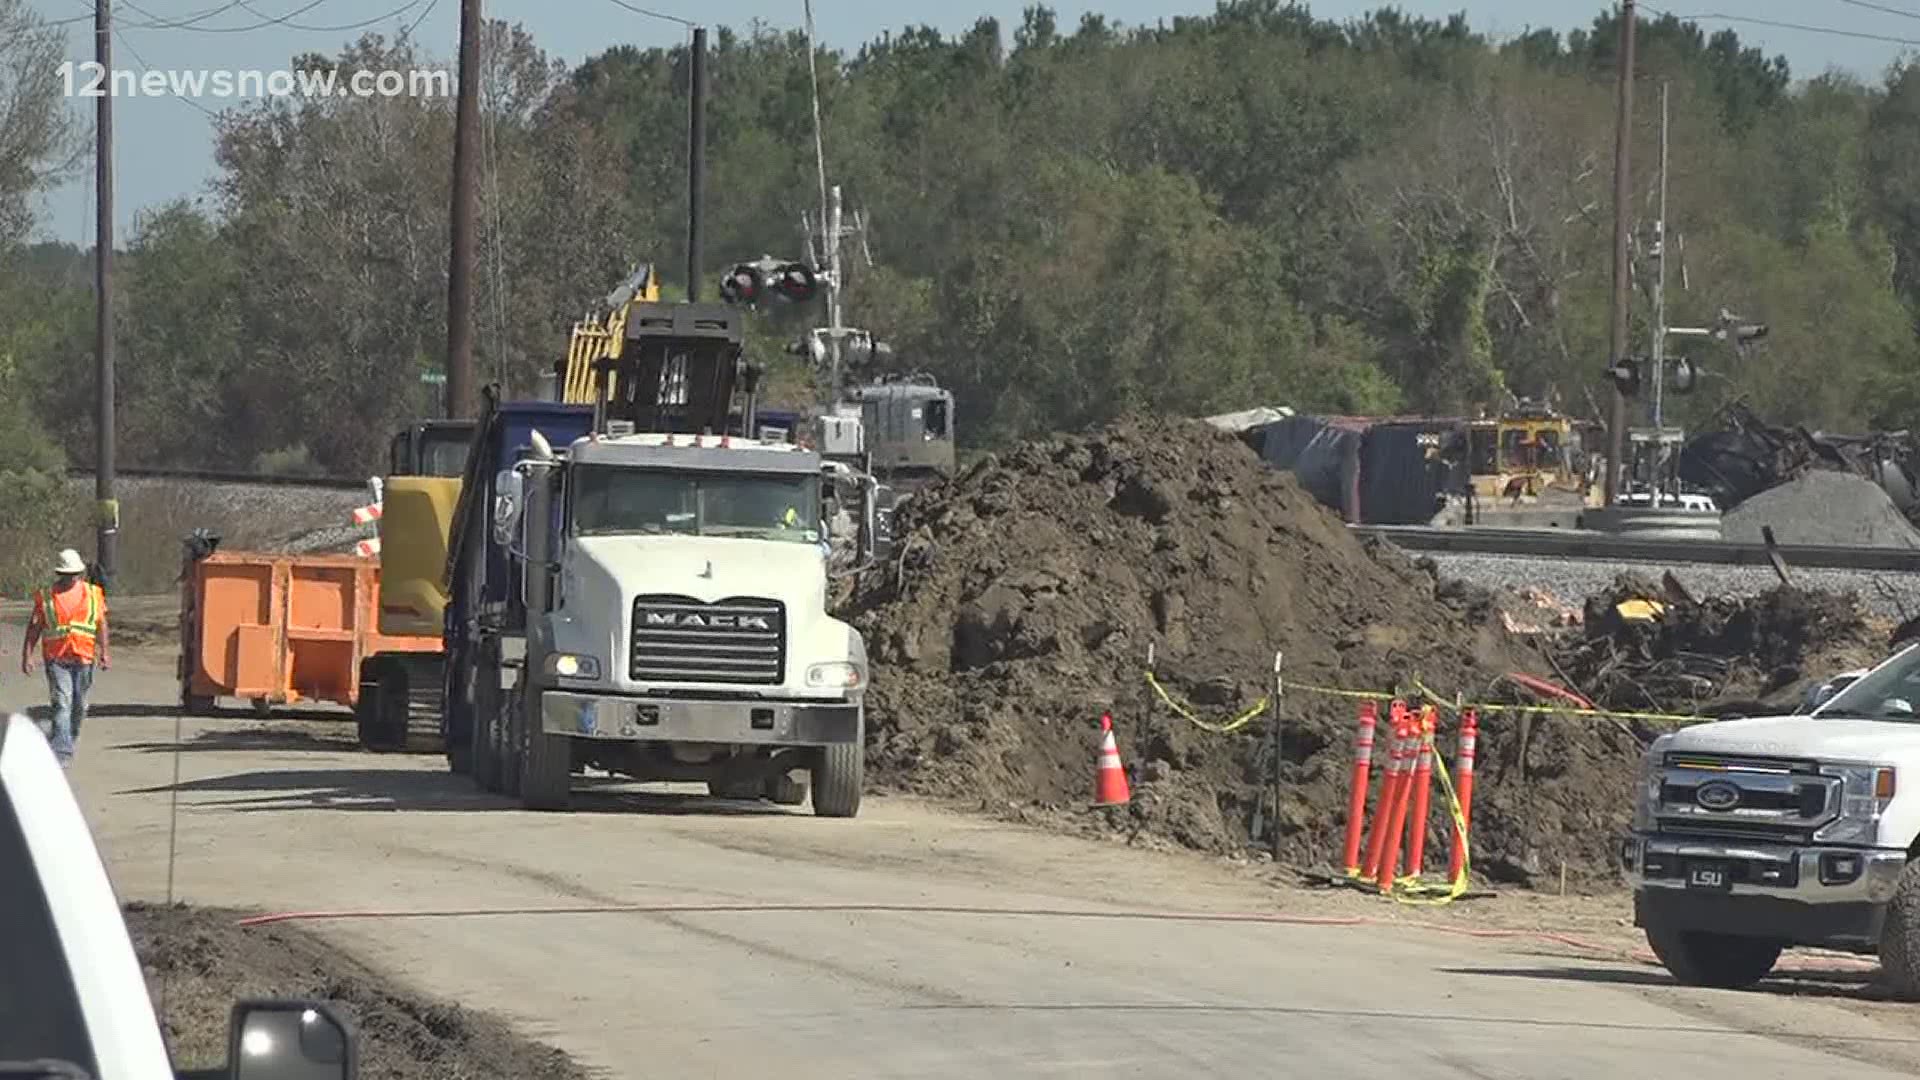 Crews have been working around the clock to clear the tracks. Now they're almost finished.